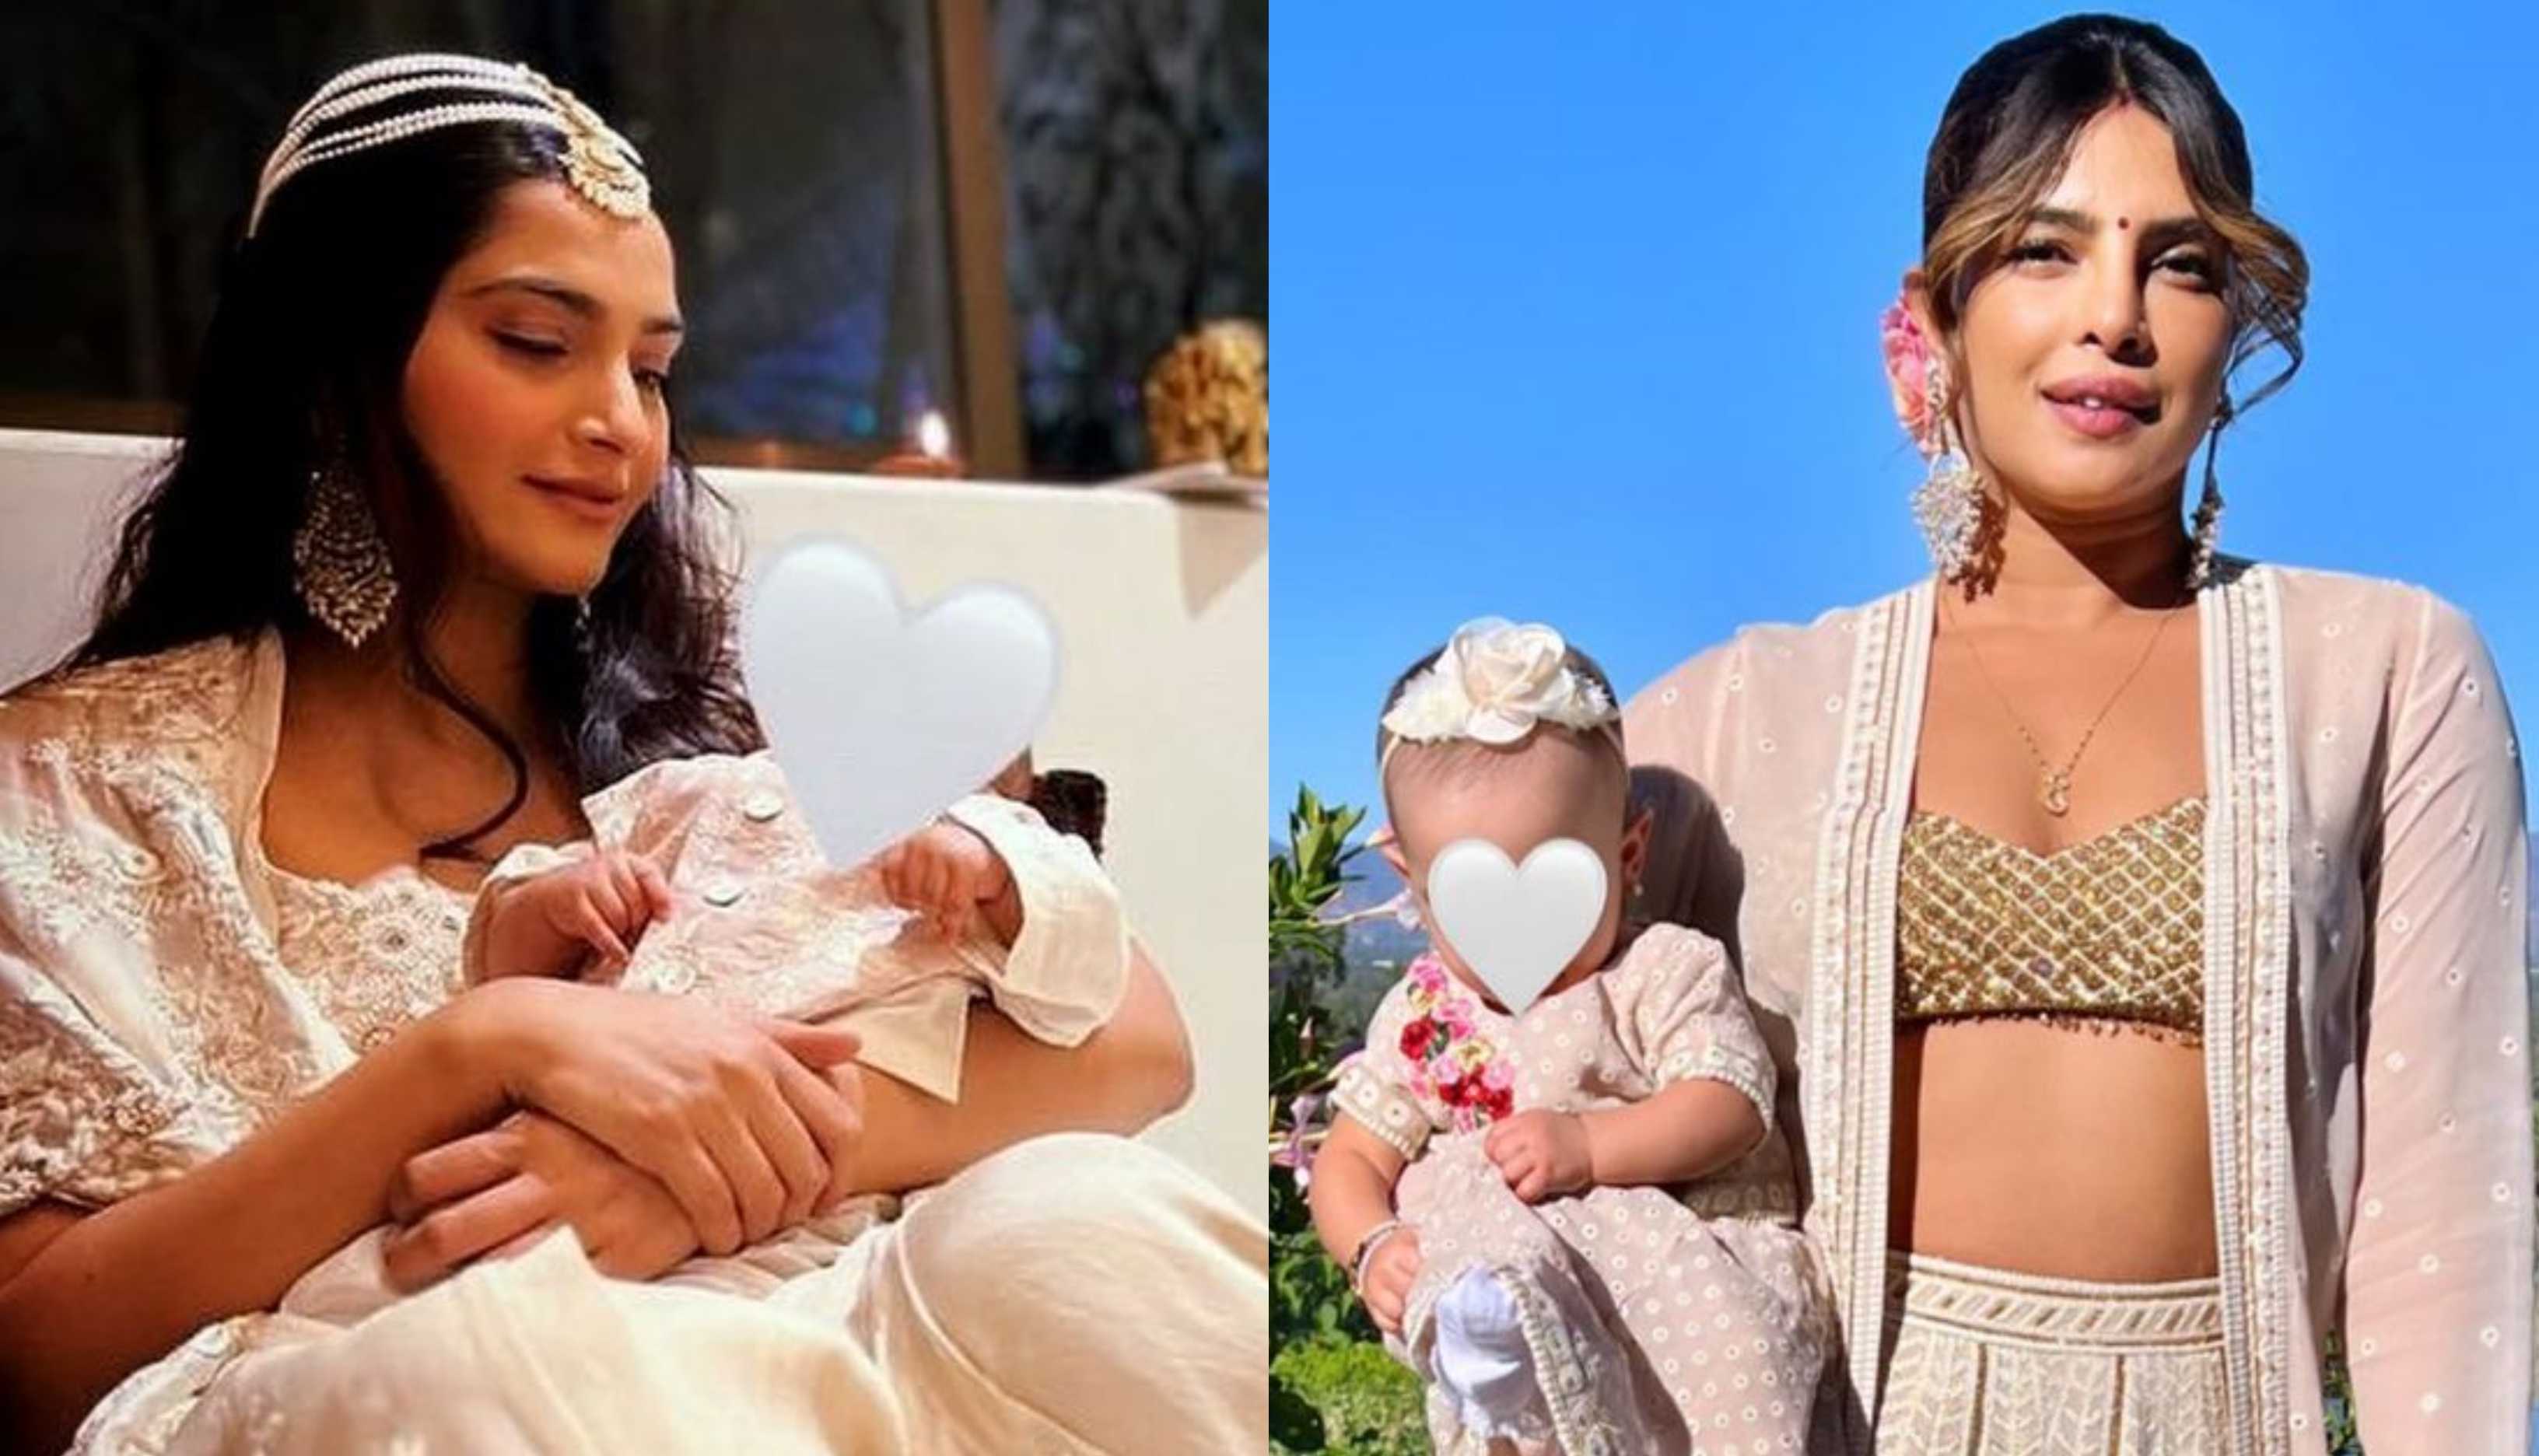 Sonam Kapoor’s unseen snap with Vayu is pure love; Malti Marie twins with Priyanka Chopra in new pics of her first Diwali